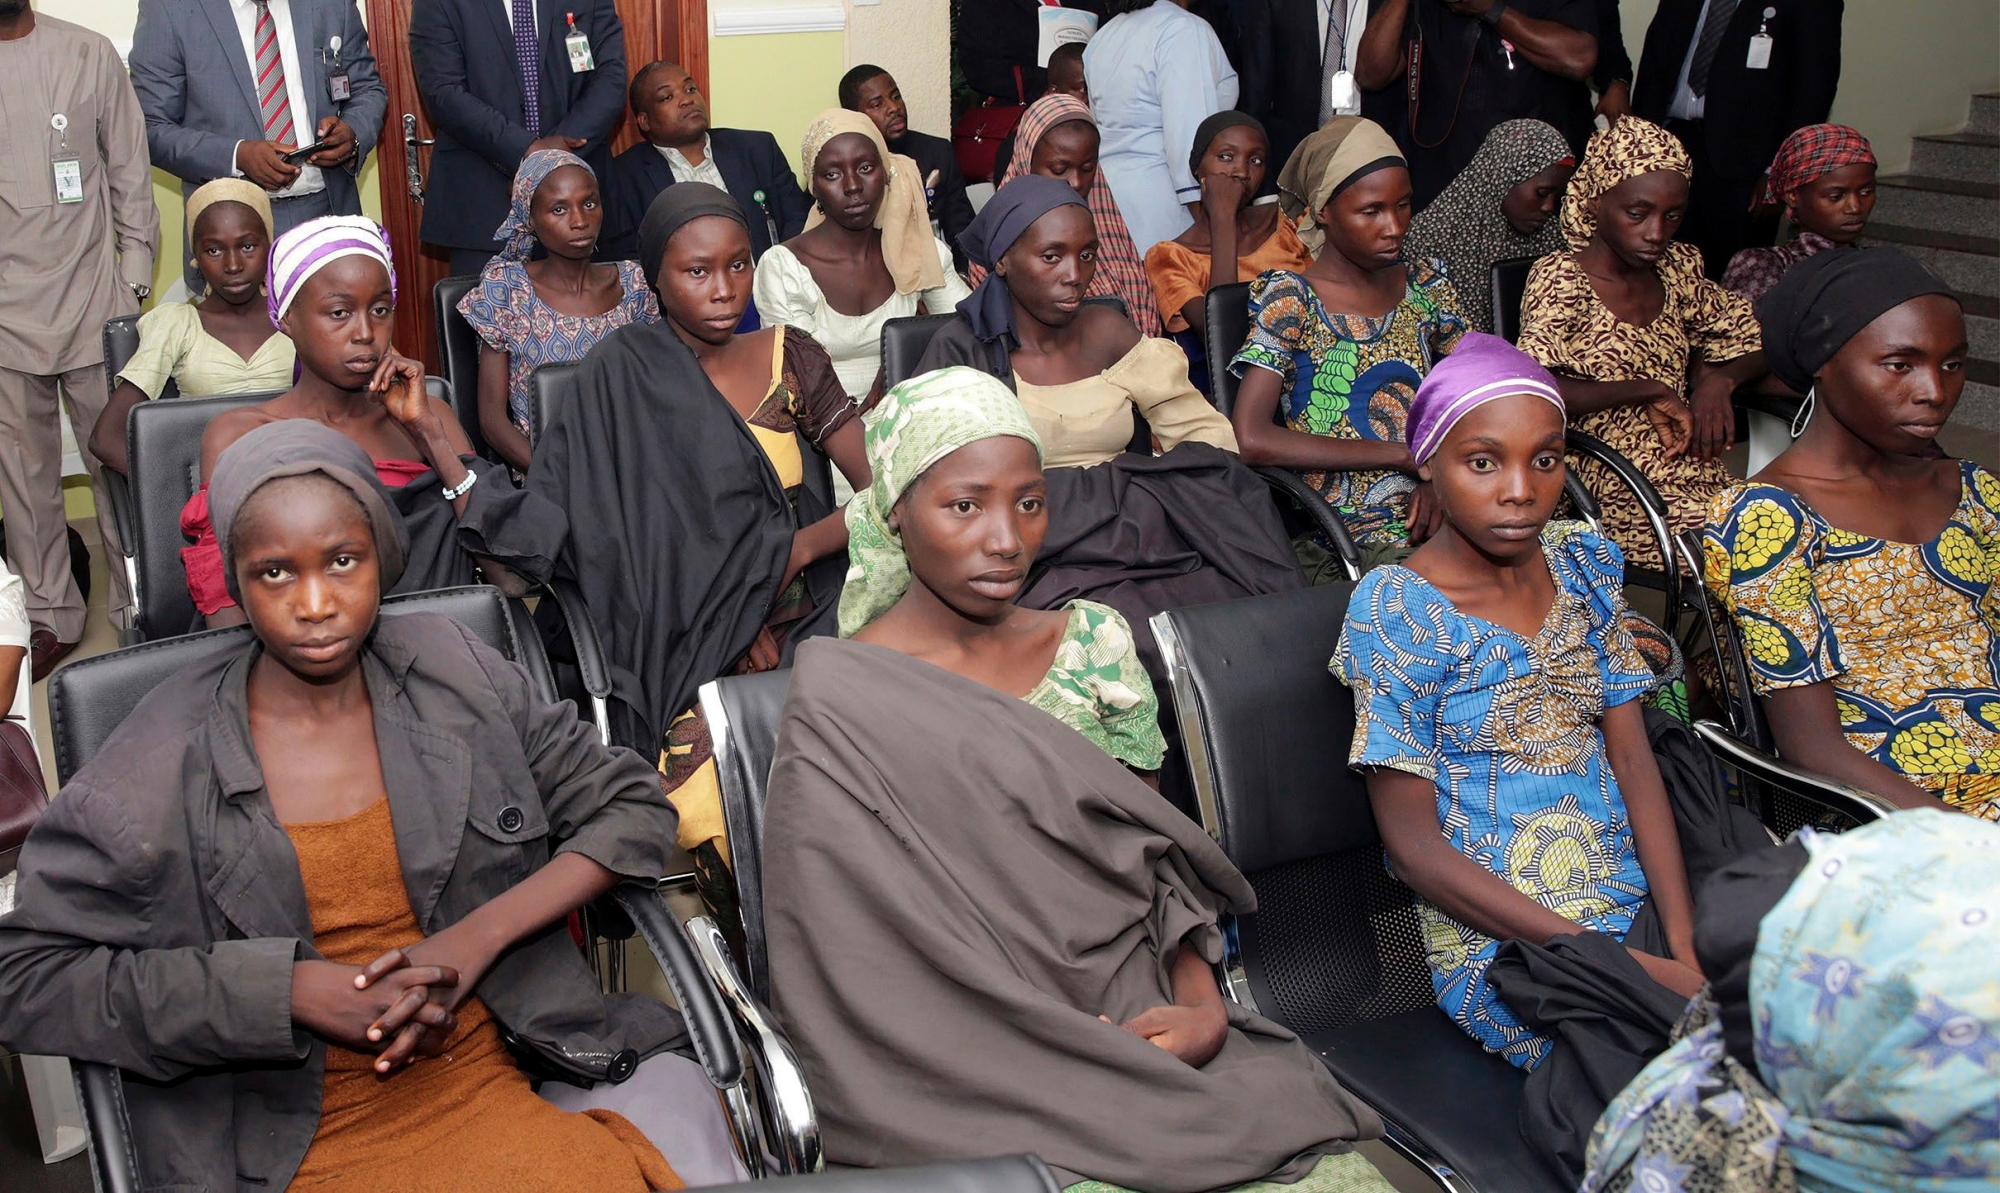 FILE - In this Thursday, Oct. 13, 2016 file photo released by the Nigeria State House, Chibok schoolgirls recently freed from Islamic extremist captivity are seen during a meeting with Nigeria's Vice President Yemi Osinbajo in Abuja, Nigeria. Large numbers of Chibok schoolgirls seized three years ago by Boko Haram have been freed in exchange for detained suspects with the extremist group, Nigeria's government announced early Sunday, May 7, 2017 in the largest release negotiated yet in the battle to save nearly 300 girls whose mass abduction exposed the mounting threat posed by the Islamic State-linked fighters. After the initial release of 21 Chibok girls in October, the government denied making an exchange or paying ransom. (Sunday Aghaeze/Nigeria State House via AP, File) Nigeria Kidnapped Schoolgirls